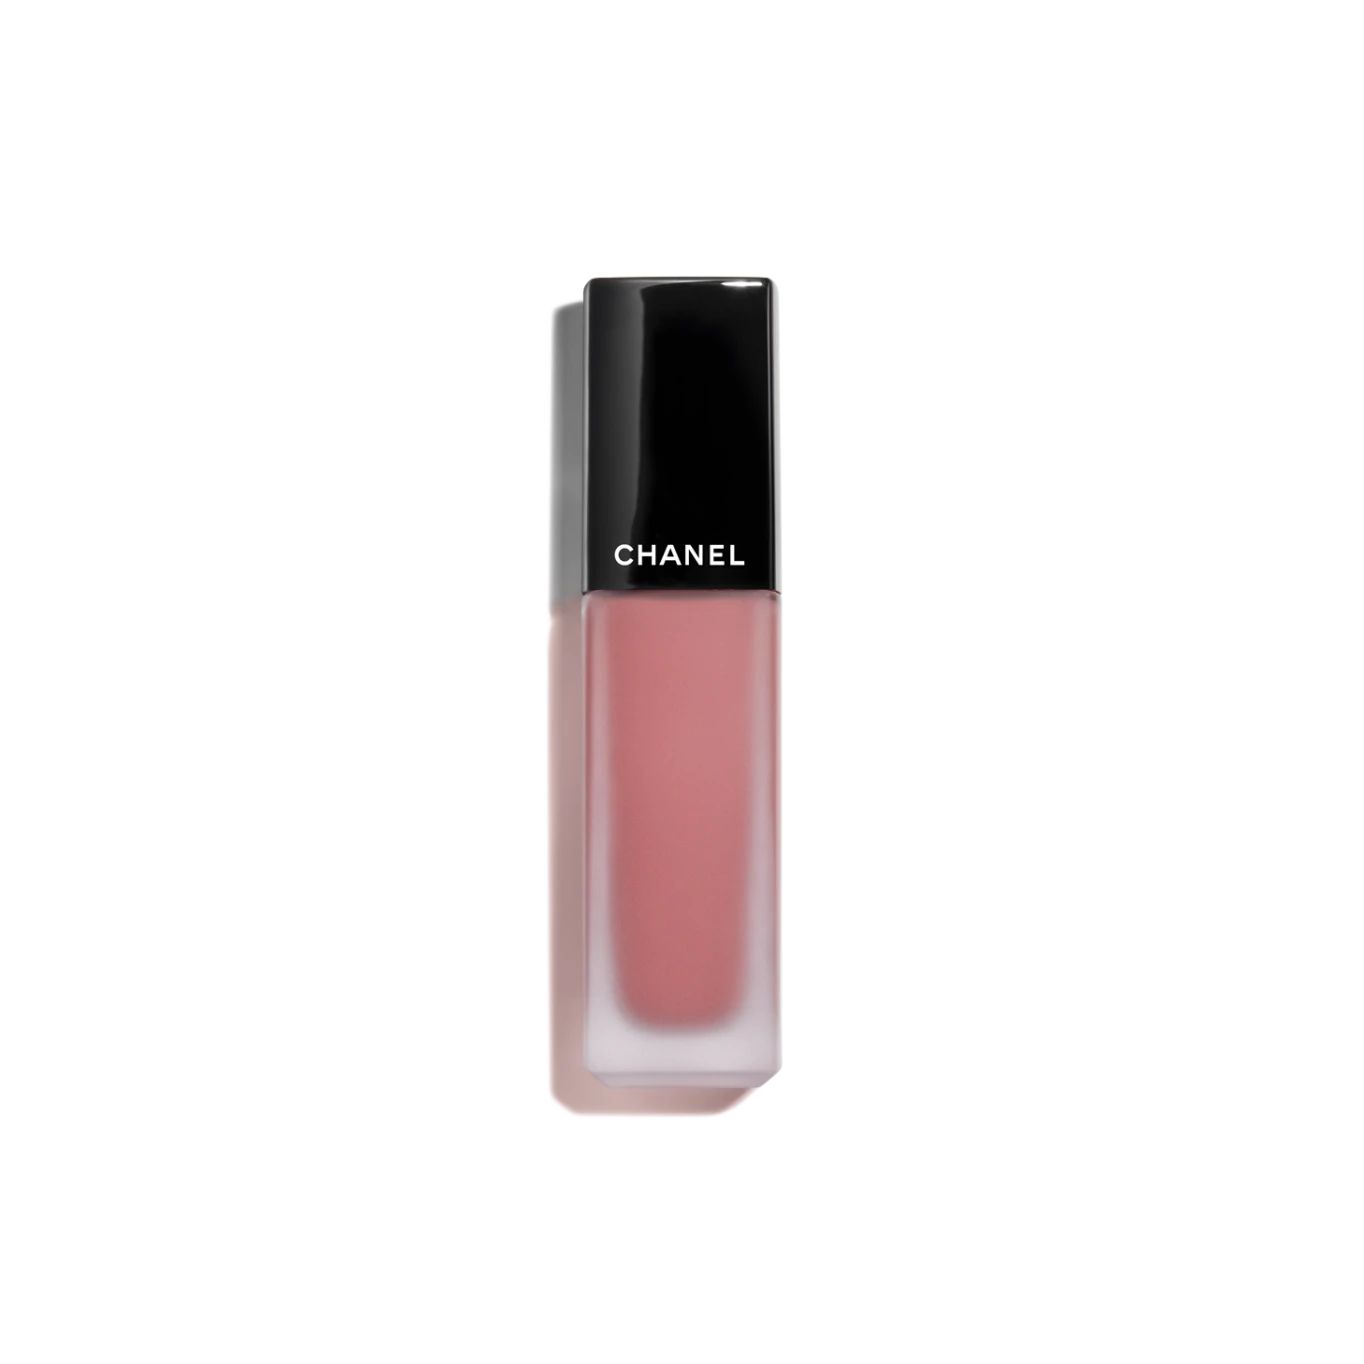 ROUGE ALLURE INK | Chanel, Inc. (US)